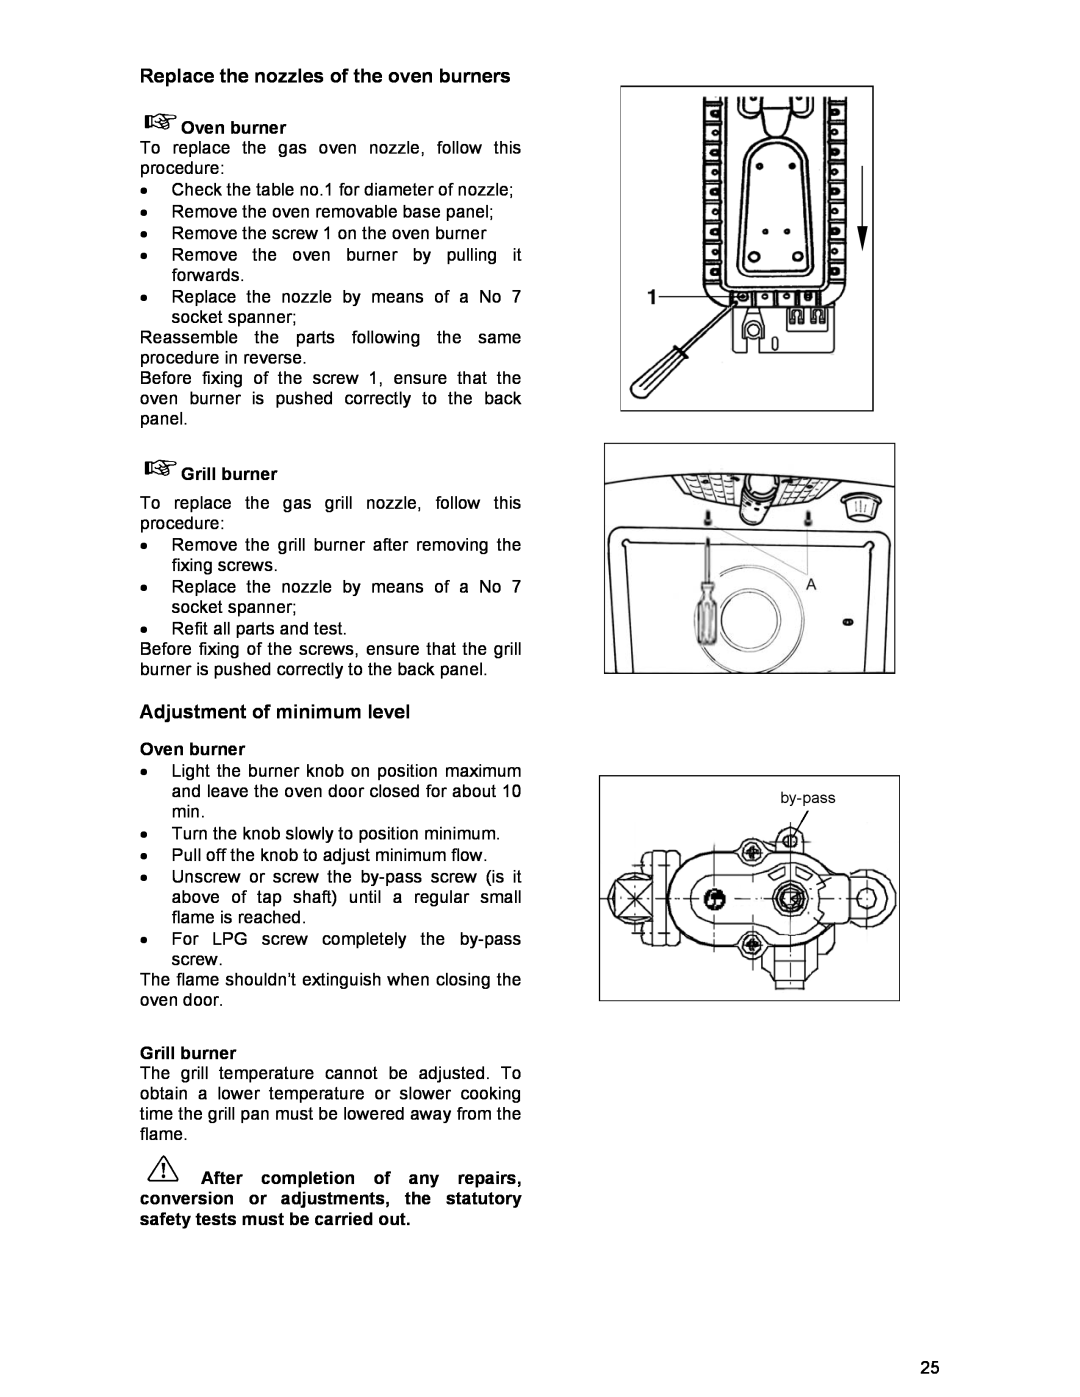 Electrolux SIG 233 manual Replace the nozzles of the oven burners, Adjustment of minimum level, by-pass 